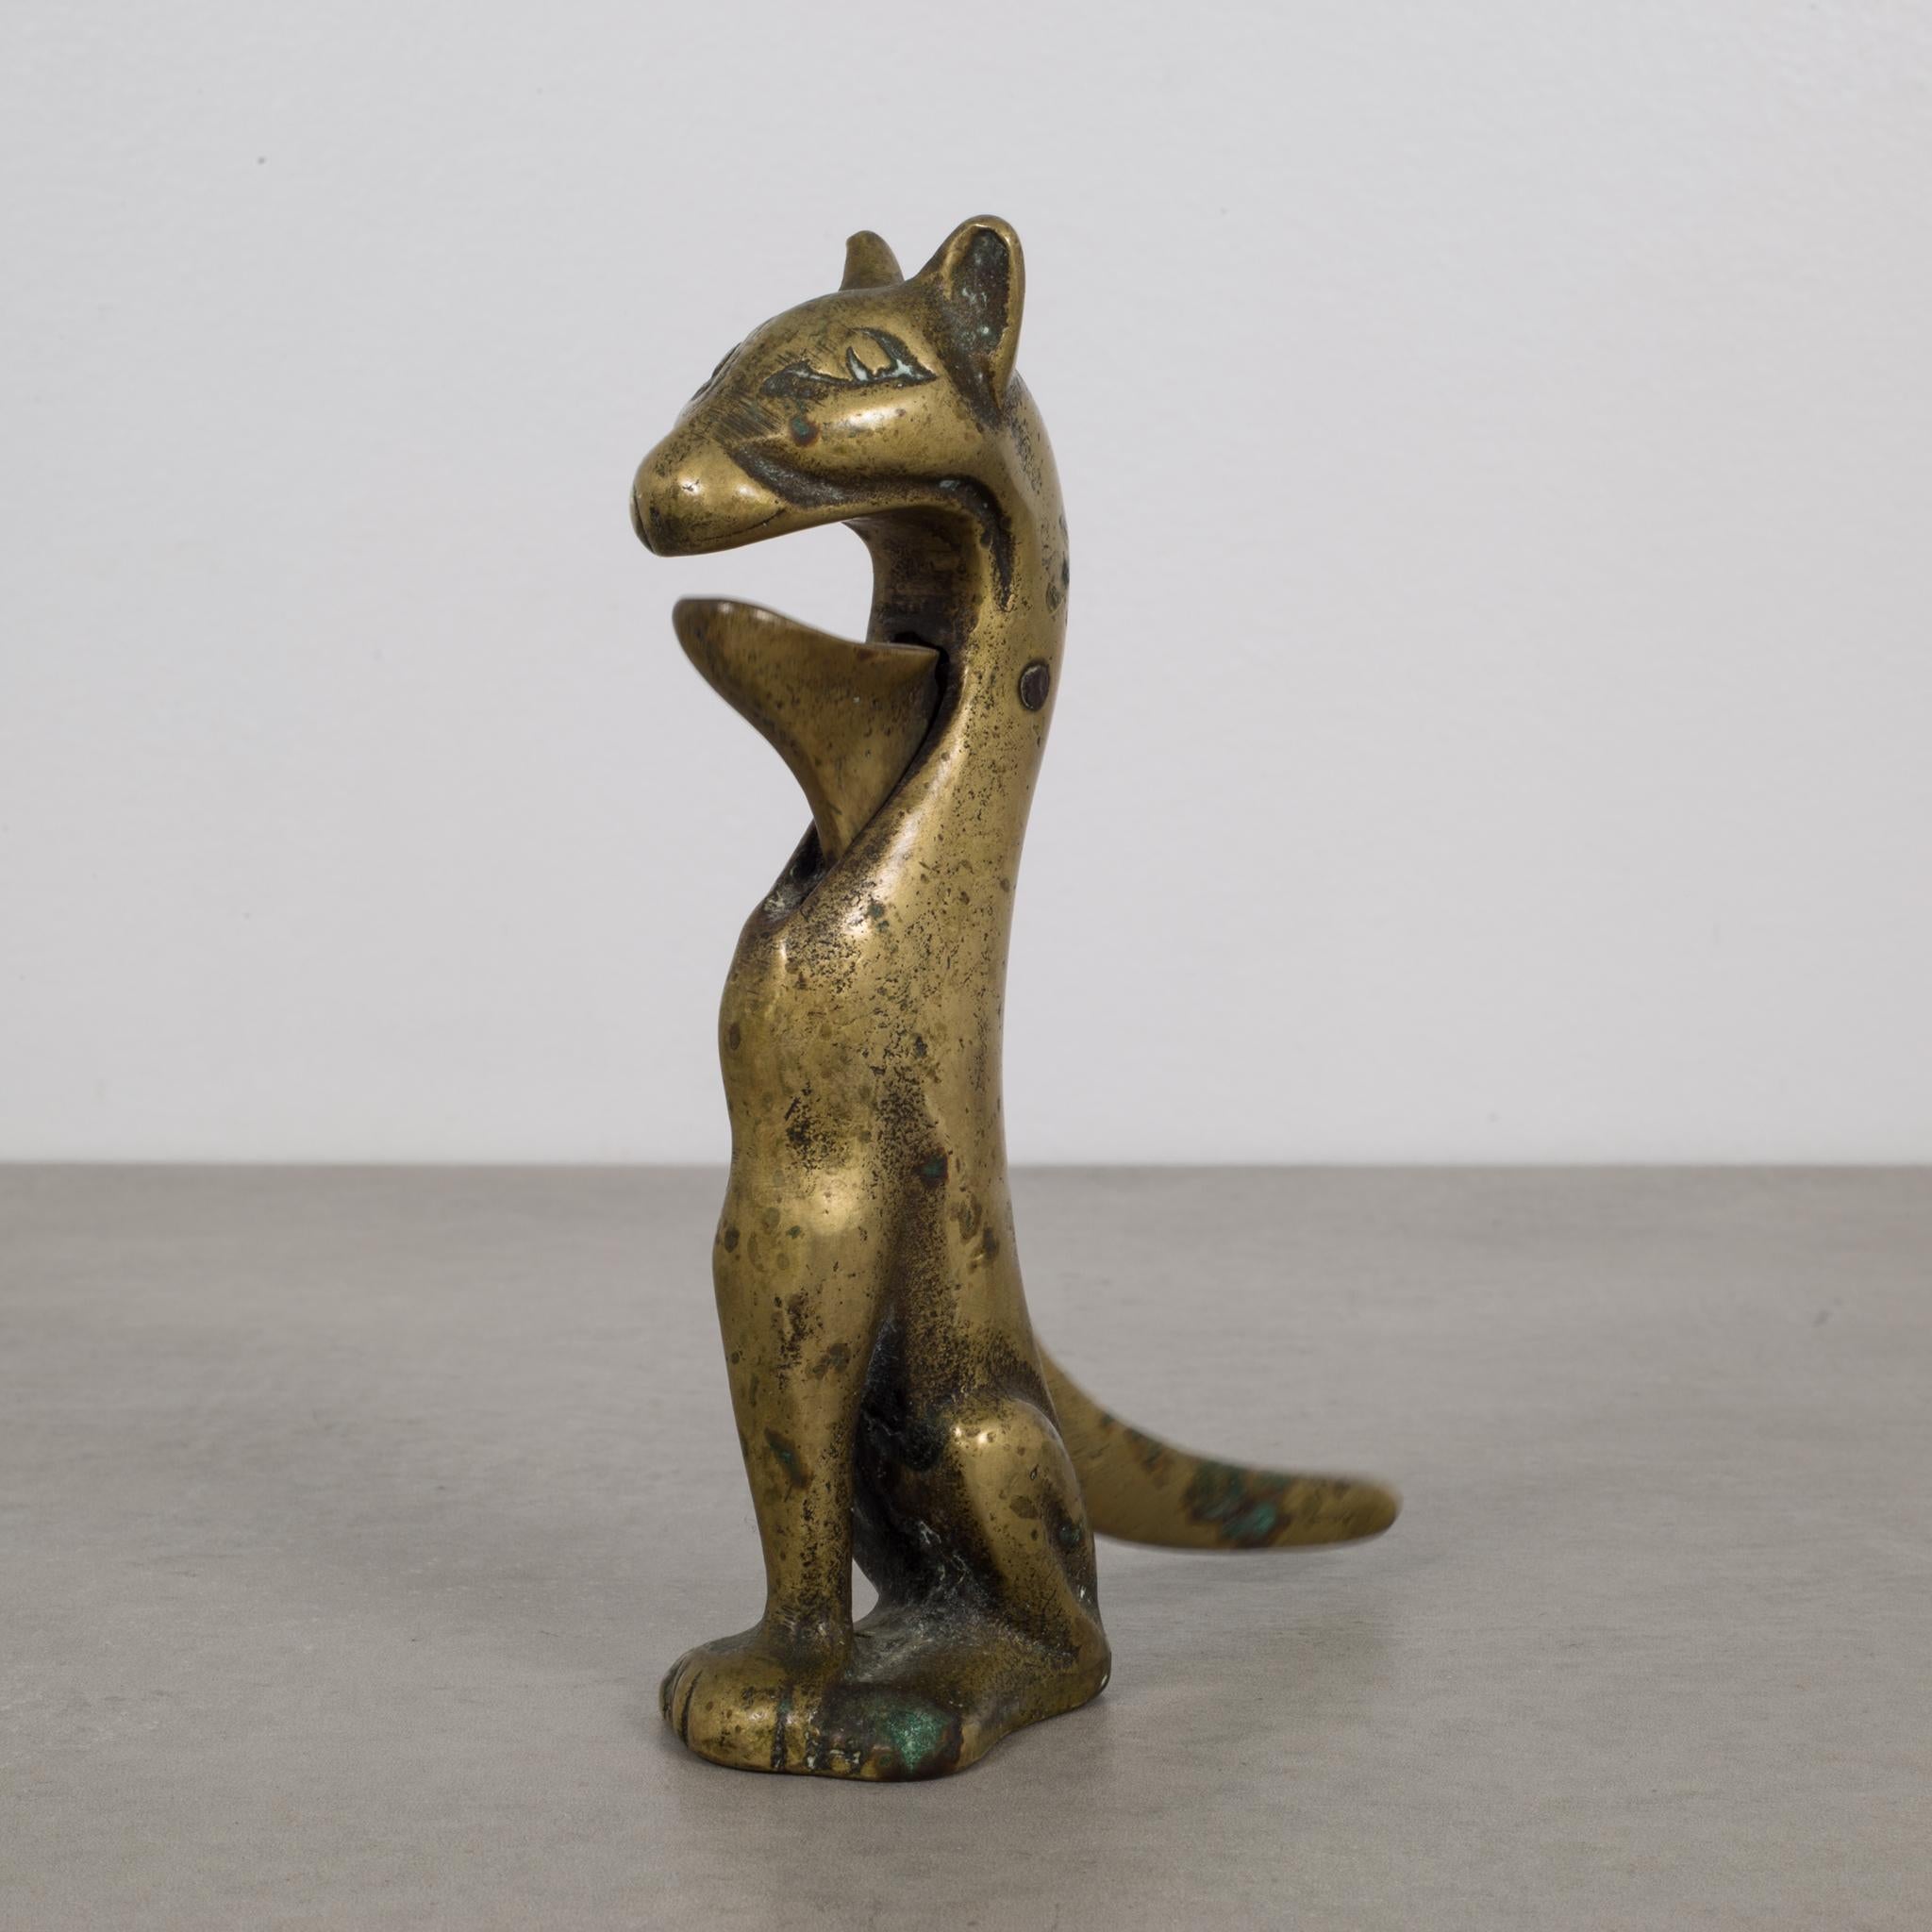 About

This is an original Victorian era solid brass cat nutcracker. The tail opens the mouth for the nut to be cracked and is in good working order. 